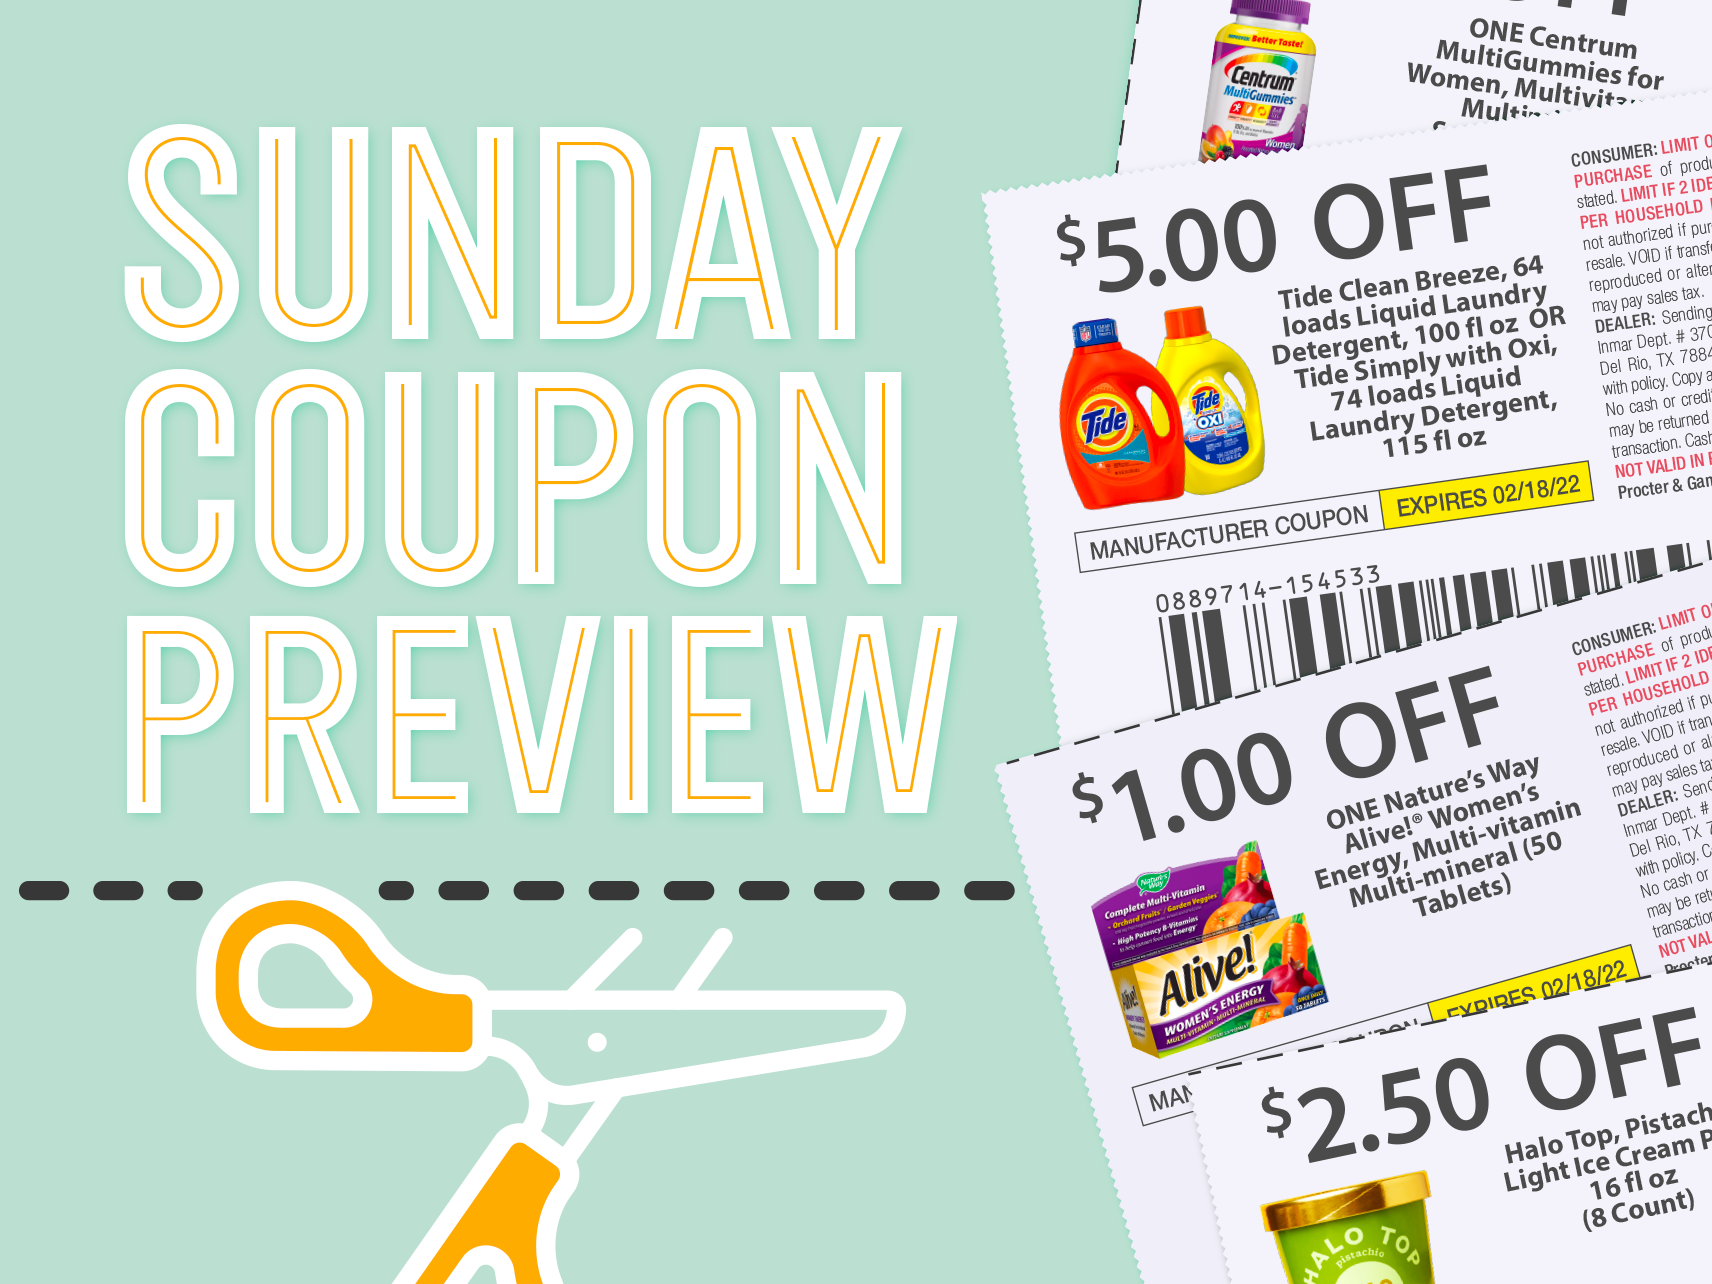 Sunday Coupon Preview For 10/9 – One Insert